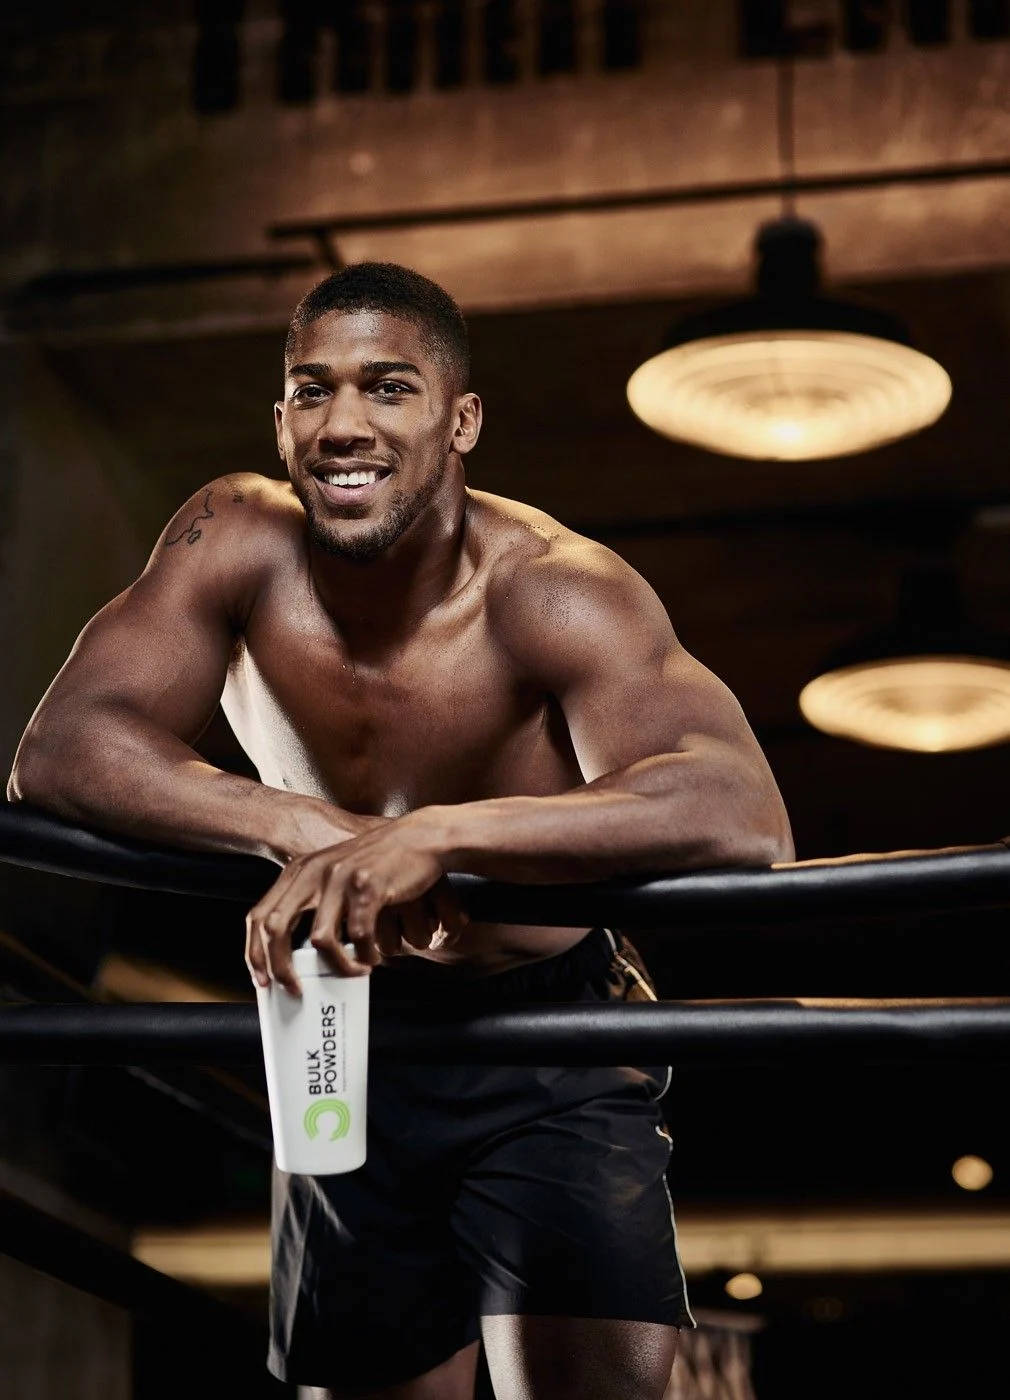 Anthony Joshua to lose £8m for Pulev fight - Daily Post Nigeria